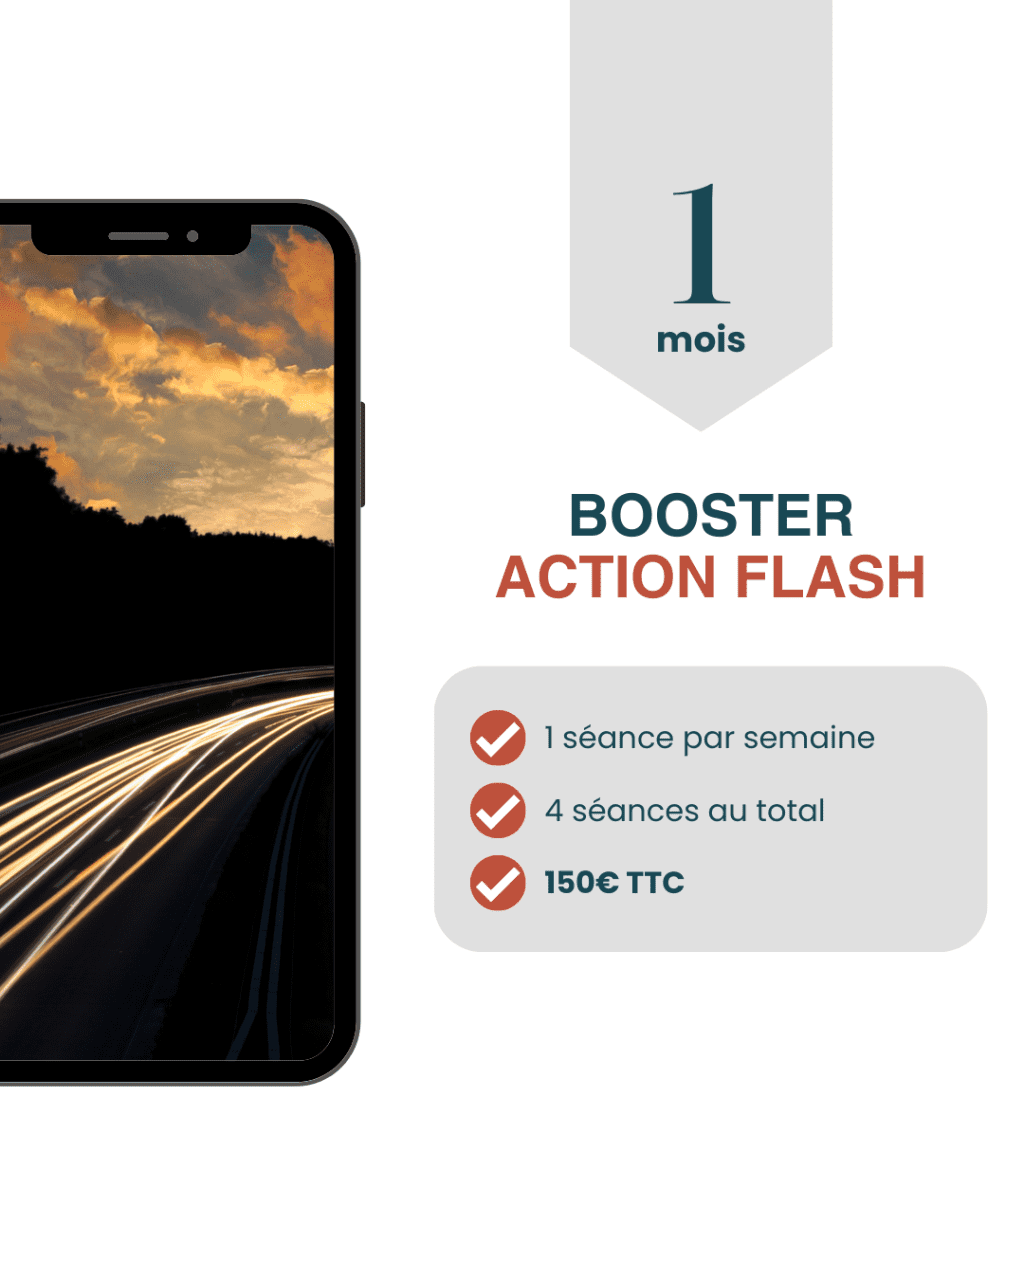 BOOSTER ACTION FLASH